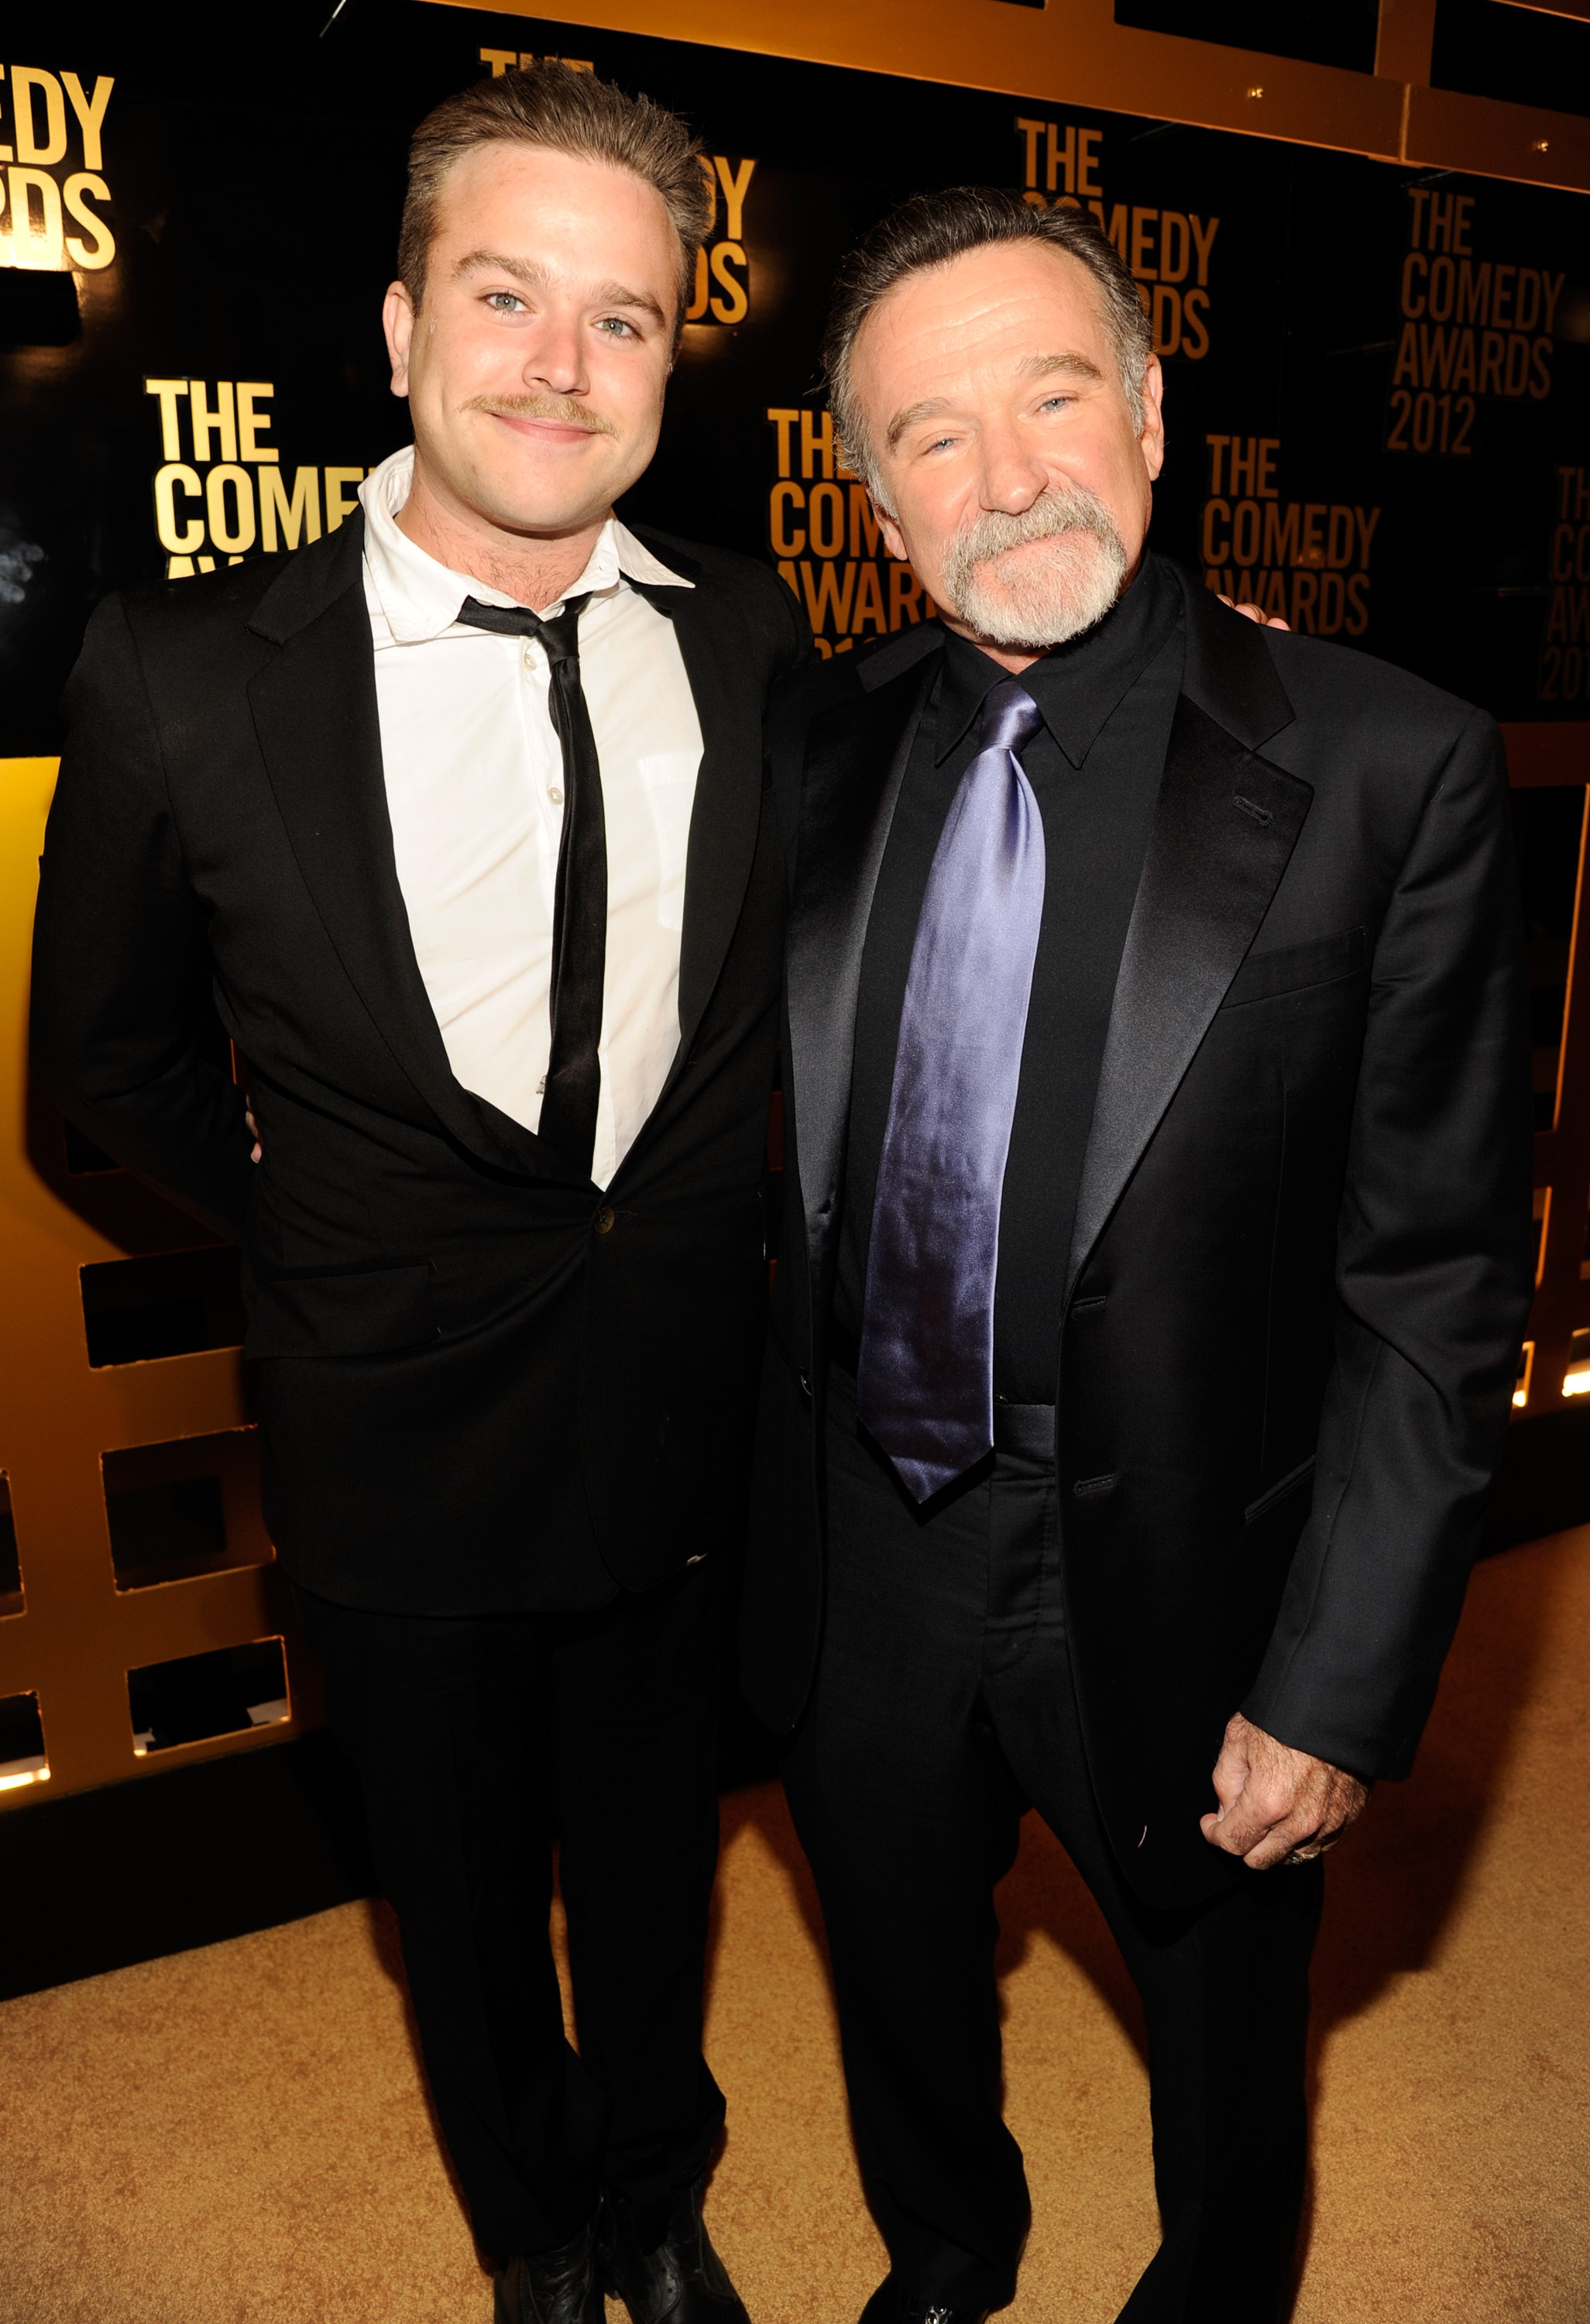 Zachary Pym Williams and Robin Williams attend The Comedy Awards 2012 at Hammerstein Ballroom on April 28, 2012 in New York City | Source: Getty Images